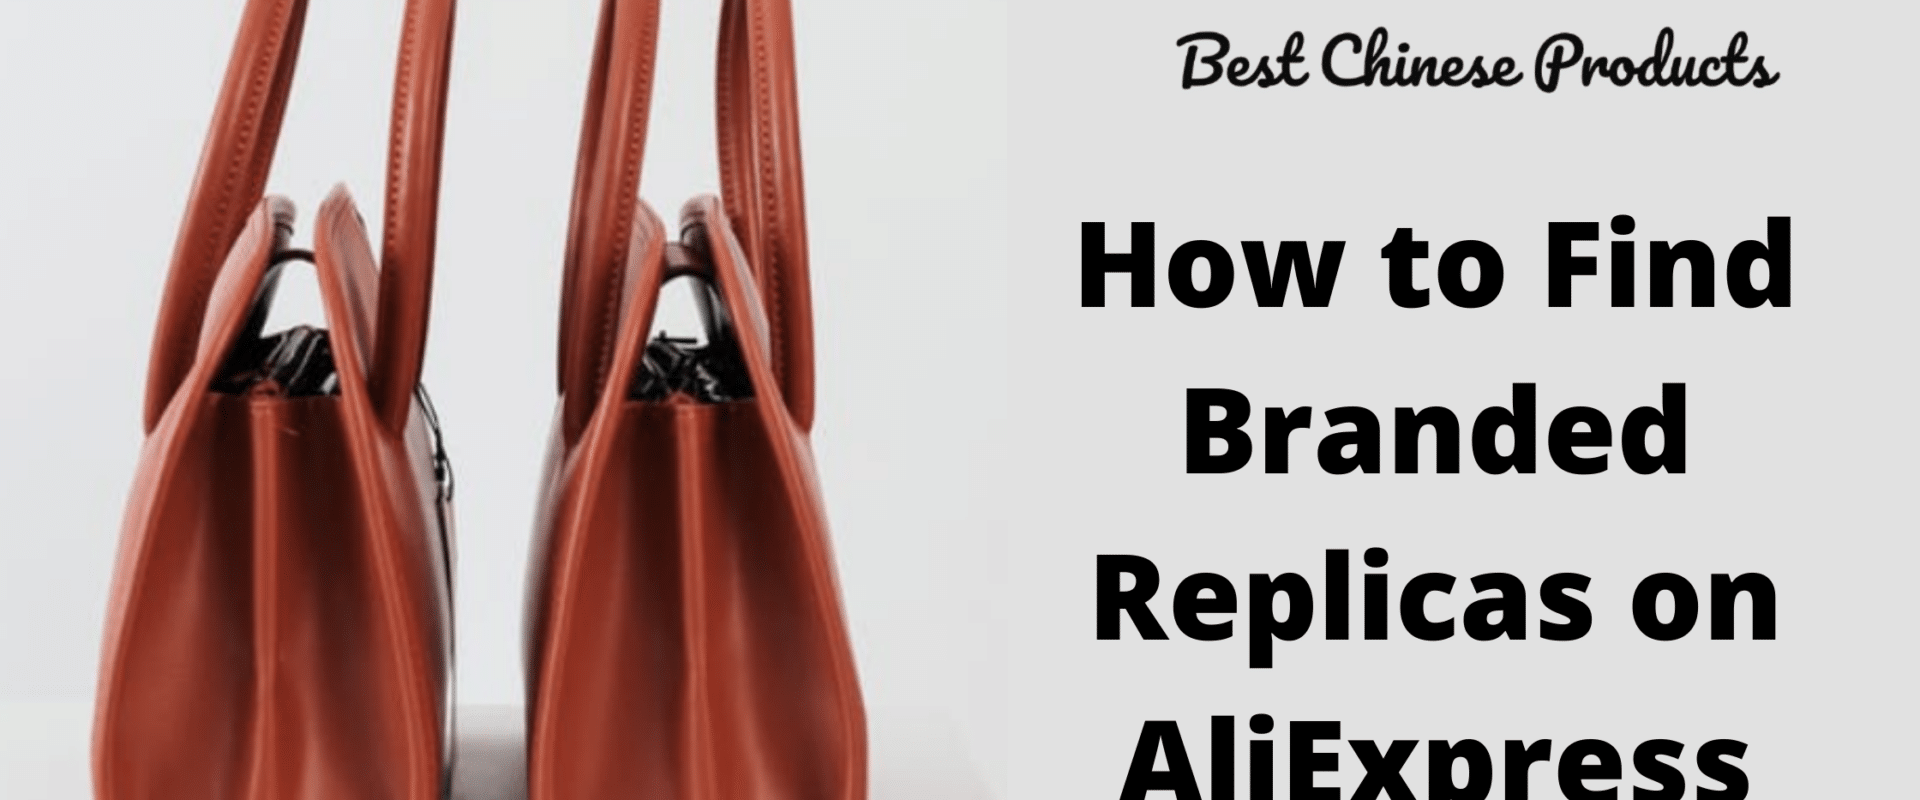 How to Find Branded Replicas on Aliexpress